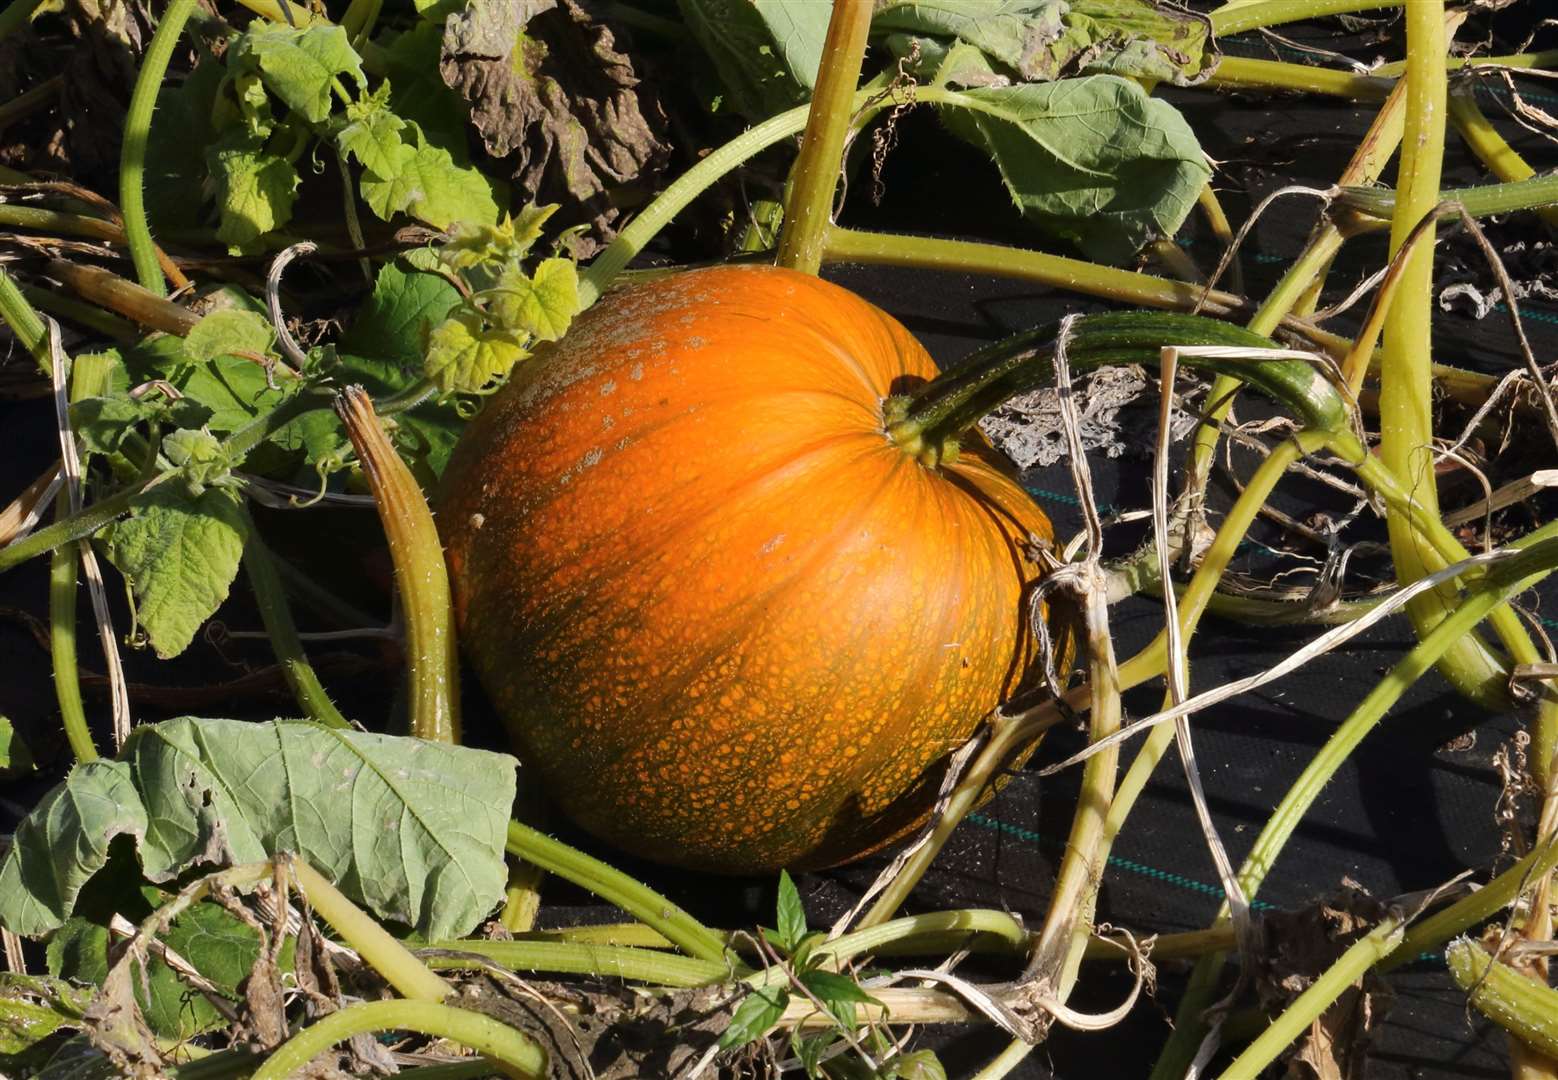 The Great Pumpkin Trail has expanded to take in several villages.